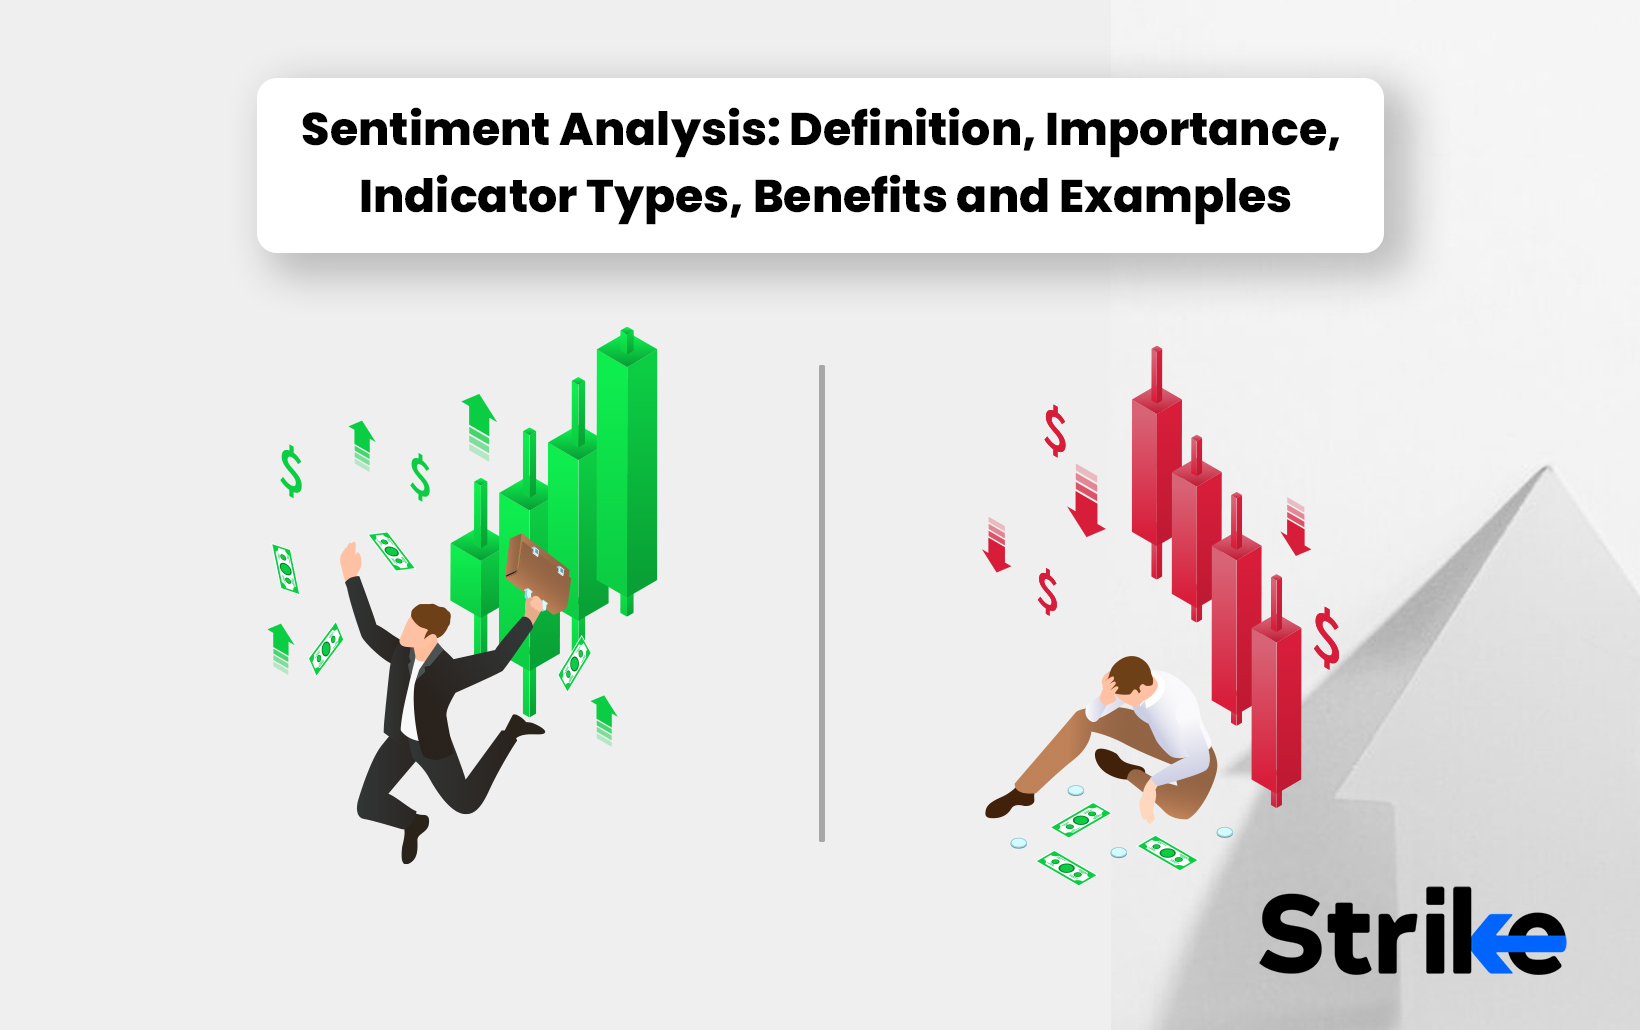 Sentiment Analysis Definition Importance Indicator Types Benefits and